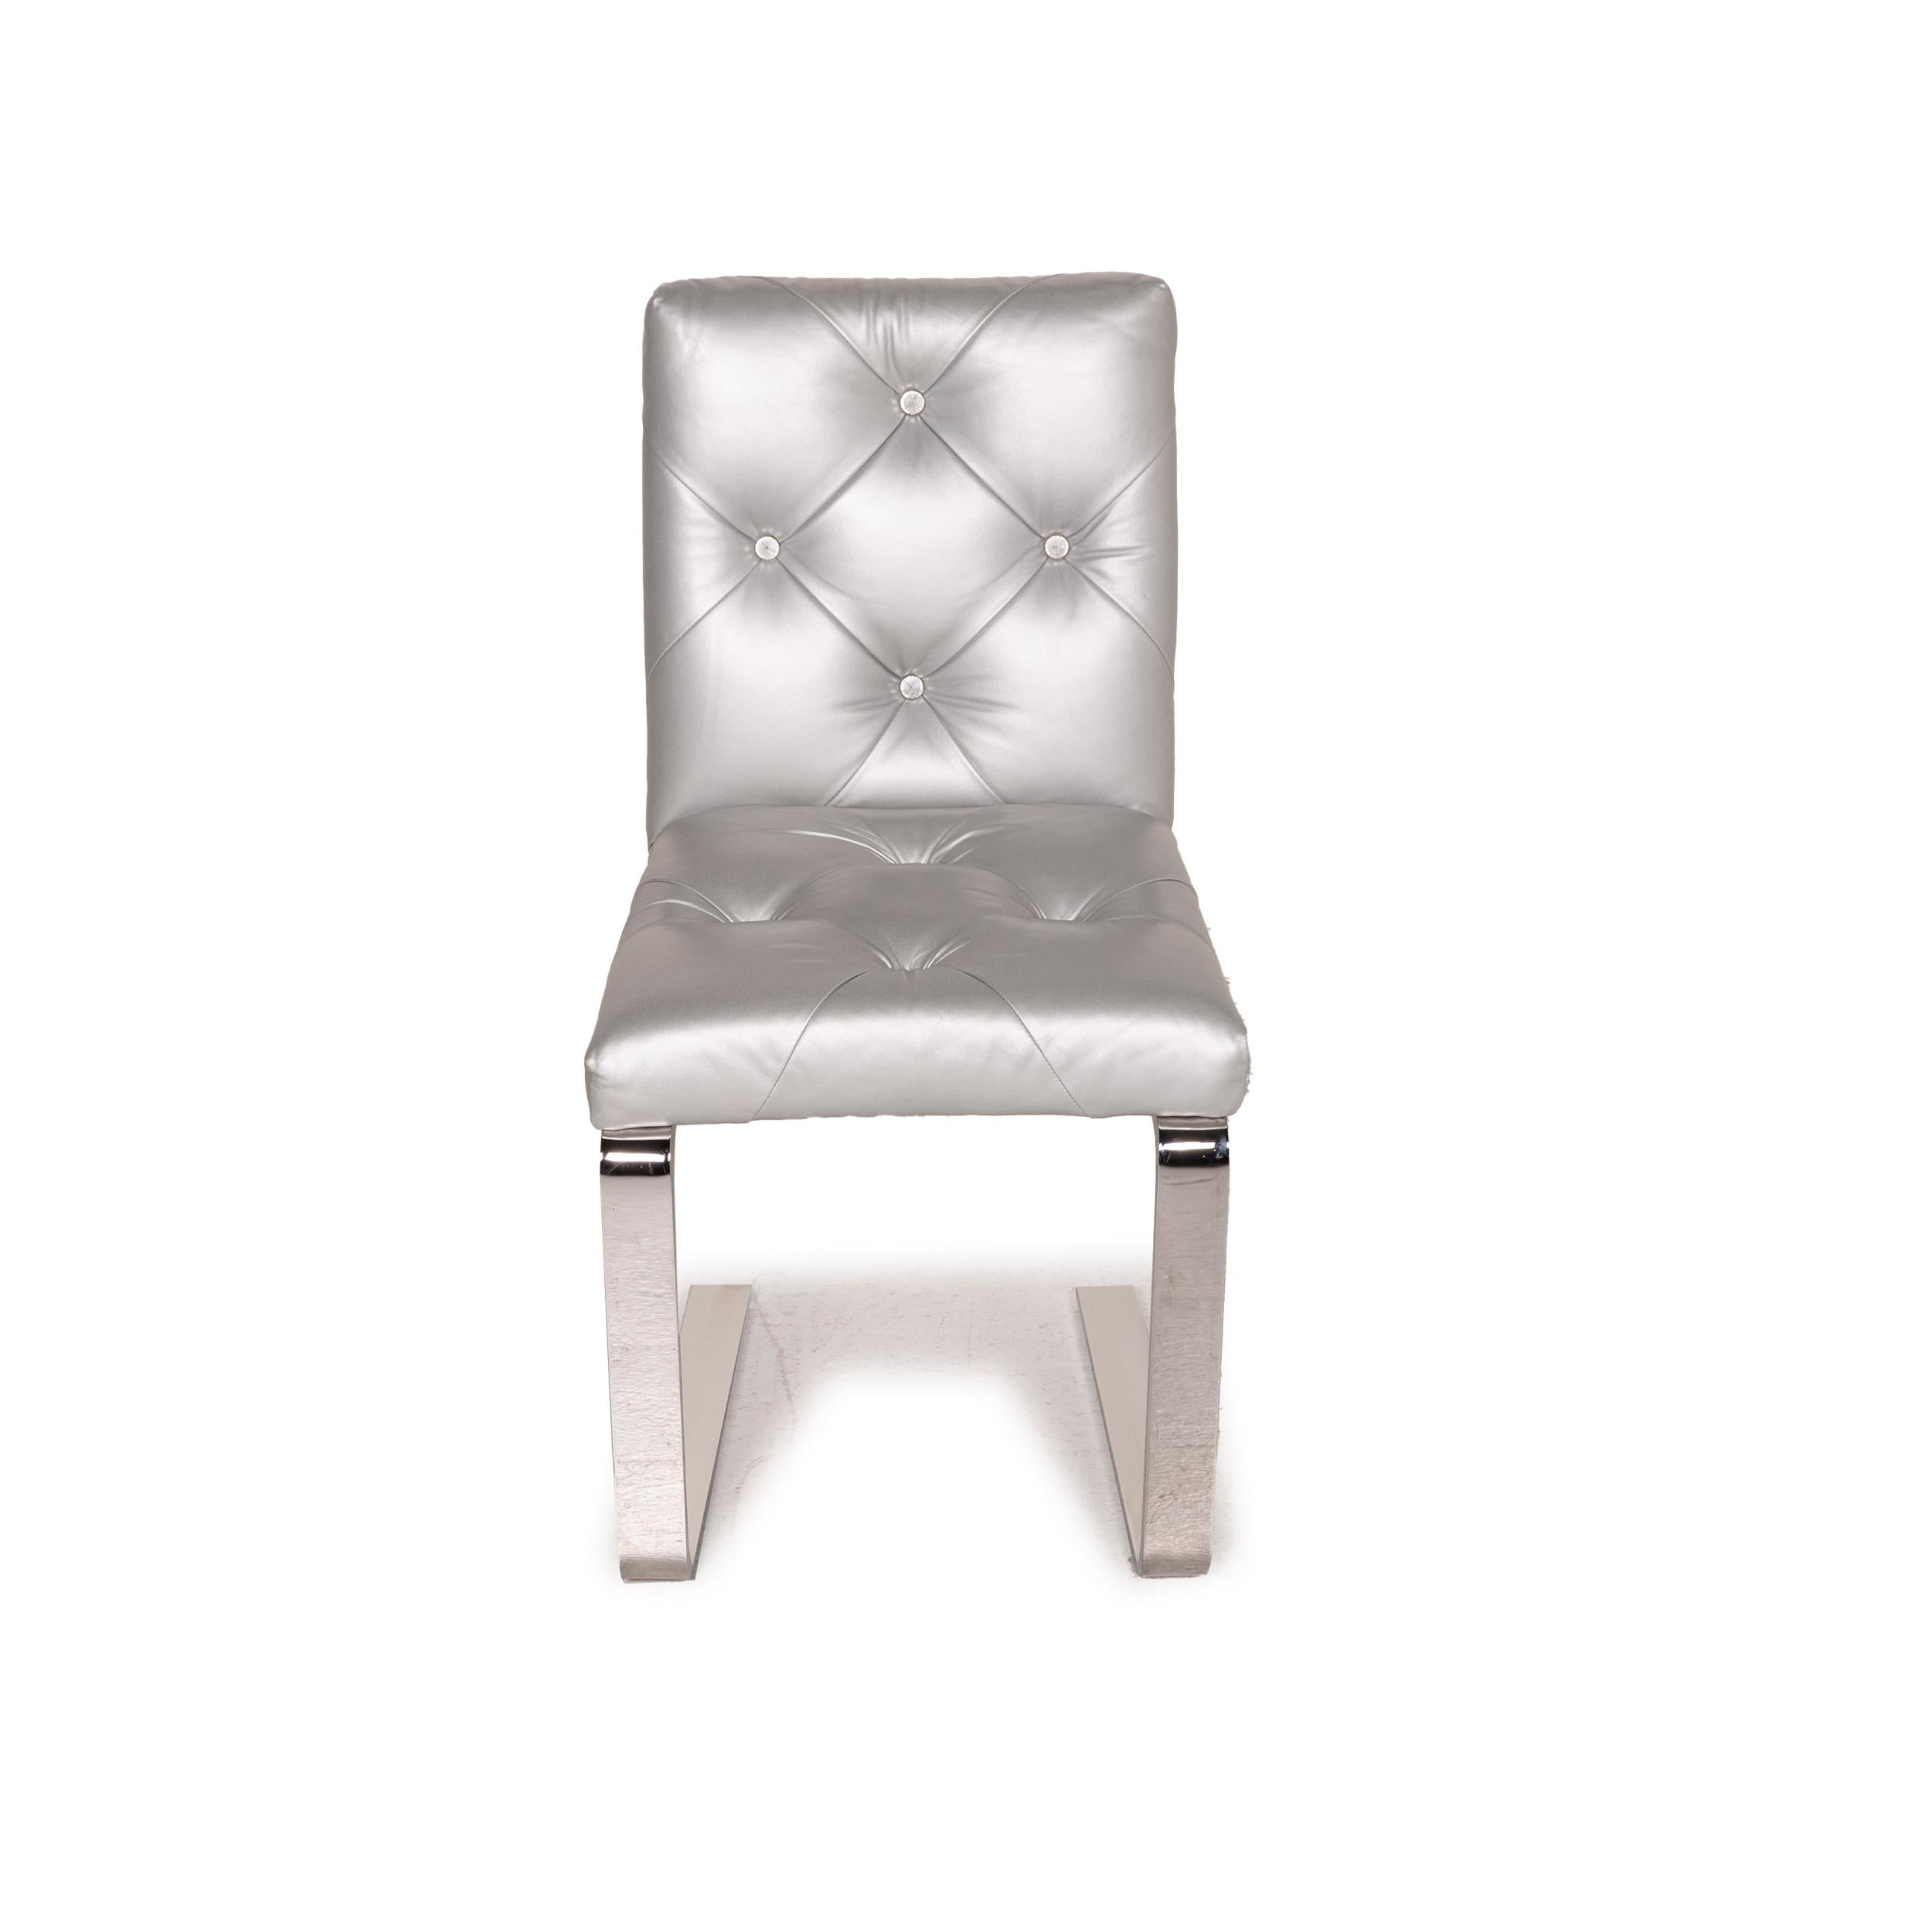 Bretz Marilyn Leather Chair Silver Chrome For Sale 1